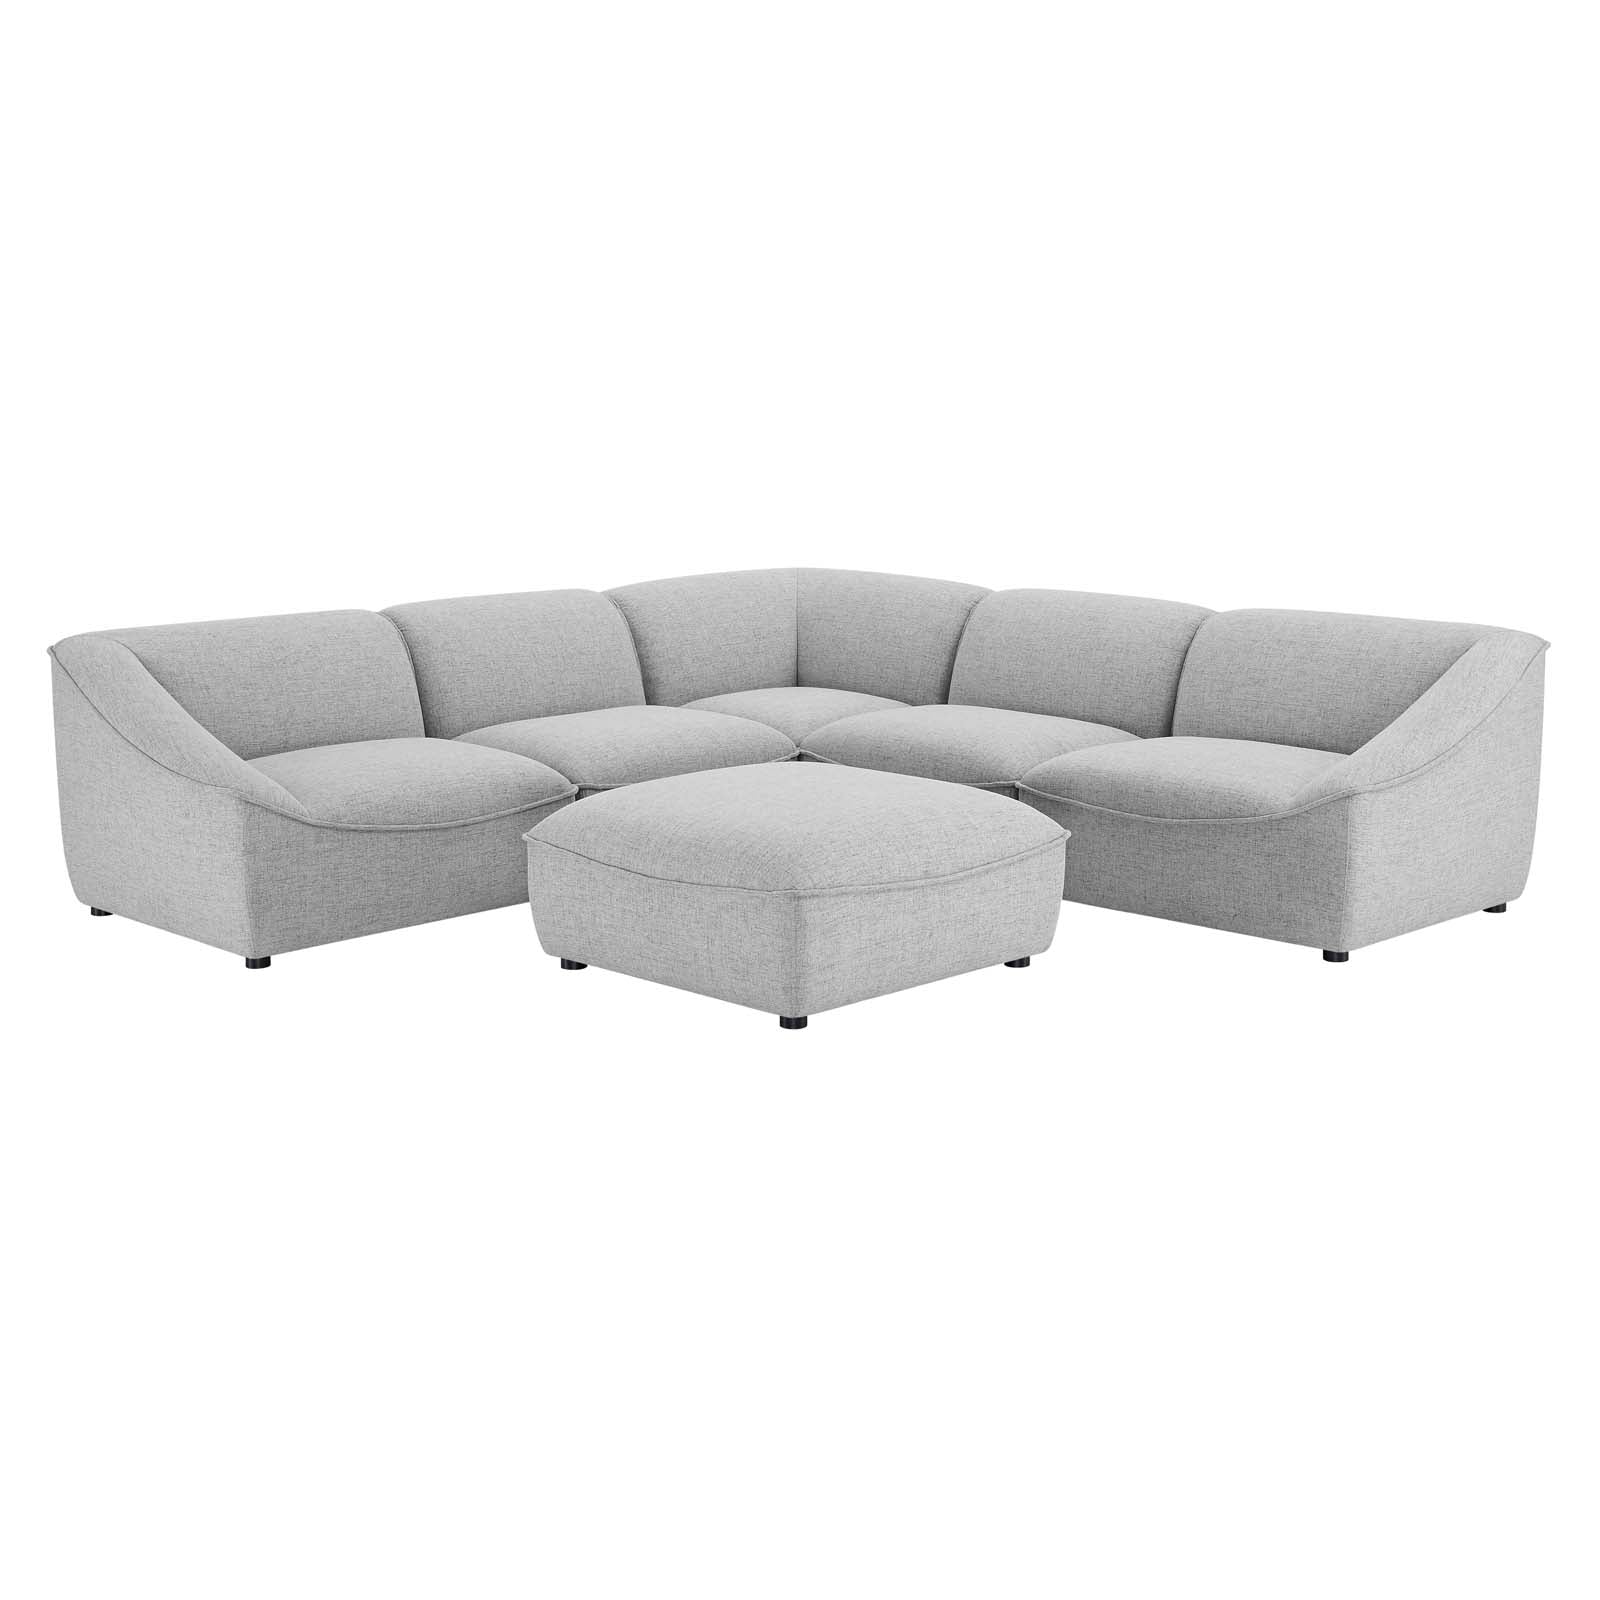 Comprise 6-Piece Sectional Sofa - East Shore Modern Home Furnishings